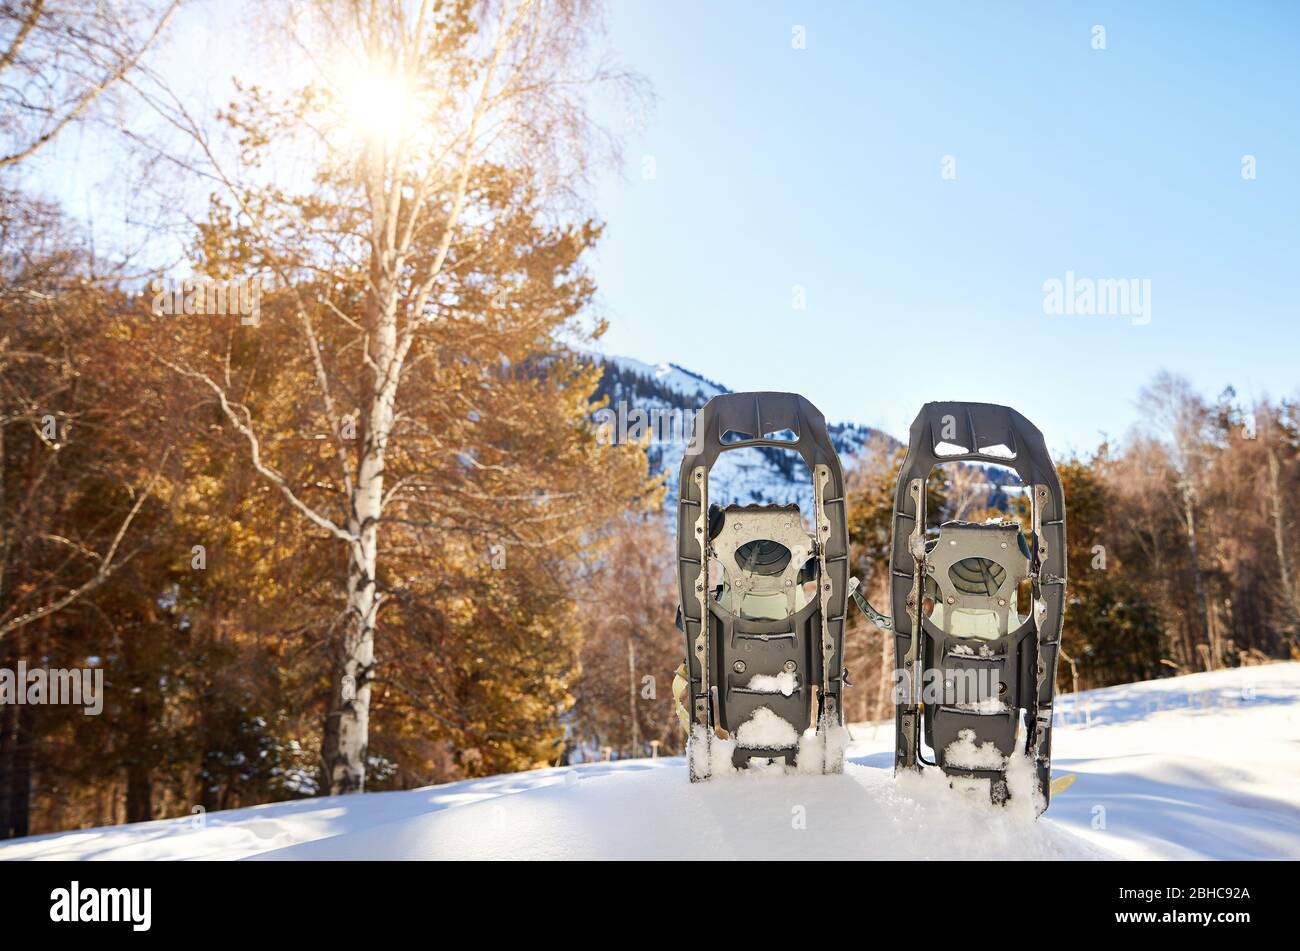 Snowshoes in the snow on the mountain forest against blue sky Stock Photo